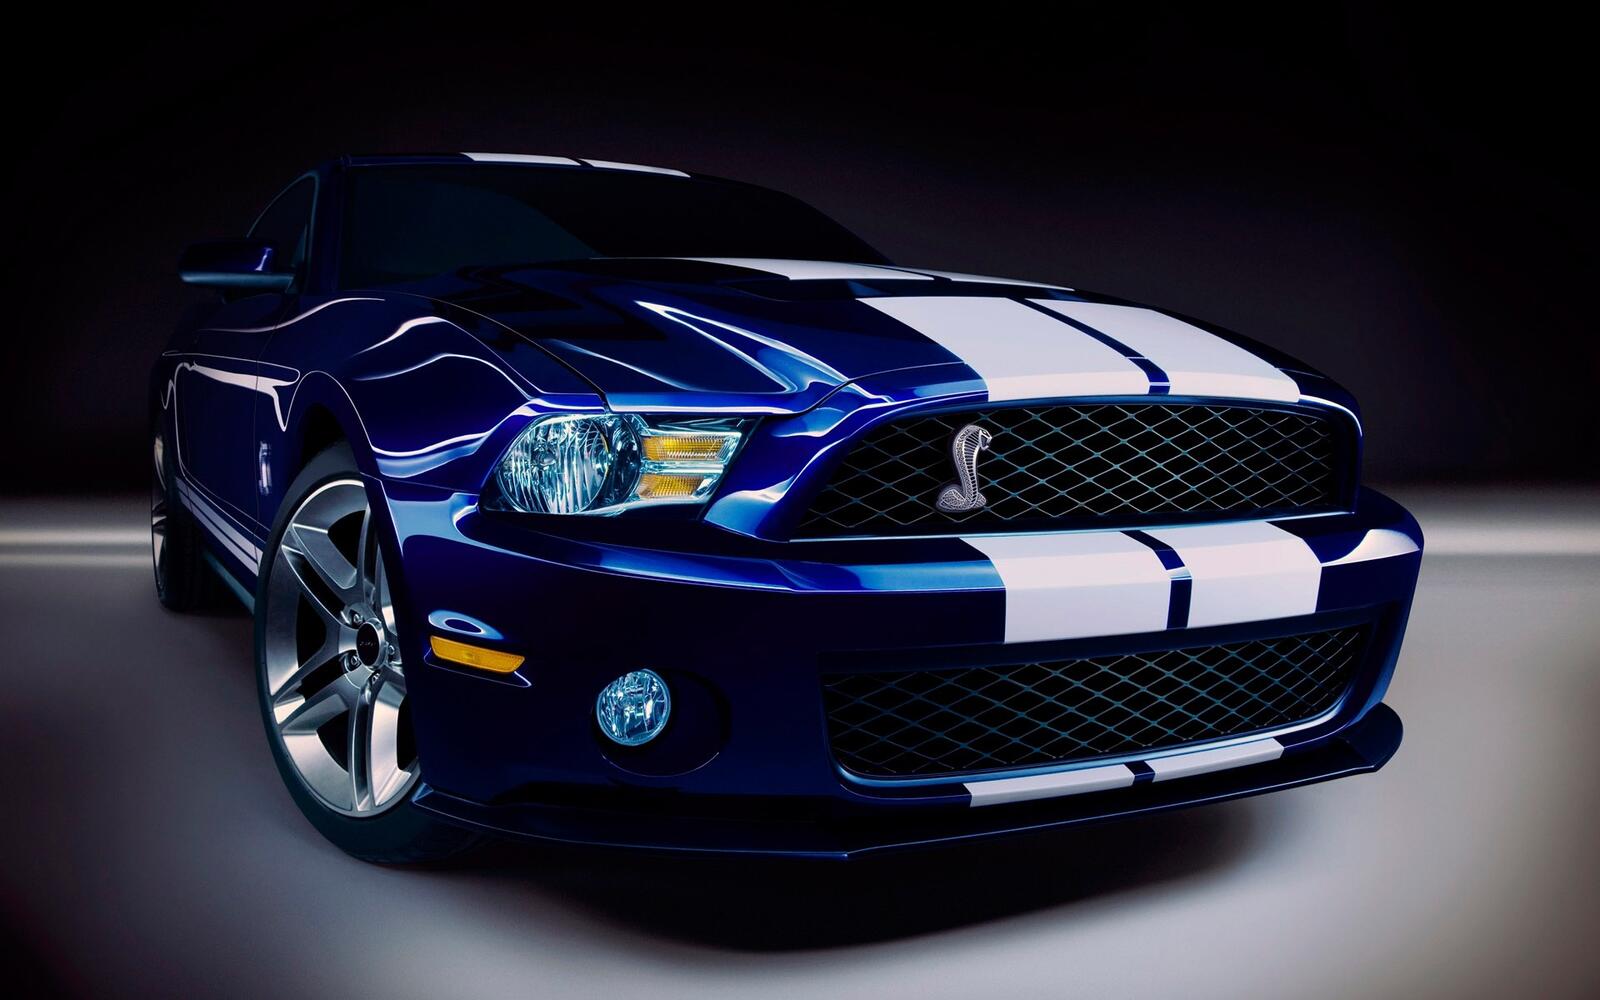 Wallpapers wallpaper ford mustang shelby front view supercar on the desktop